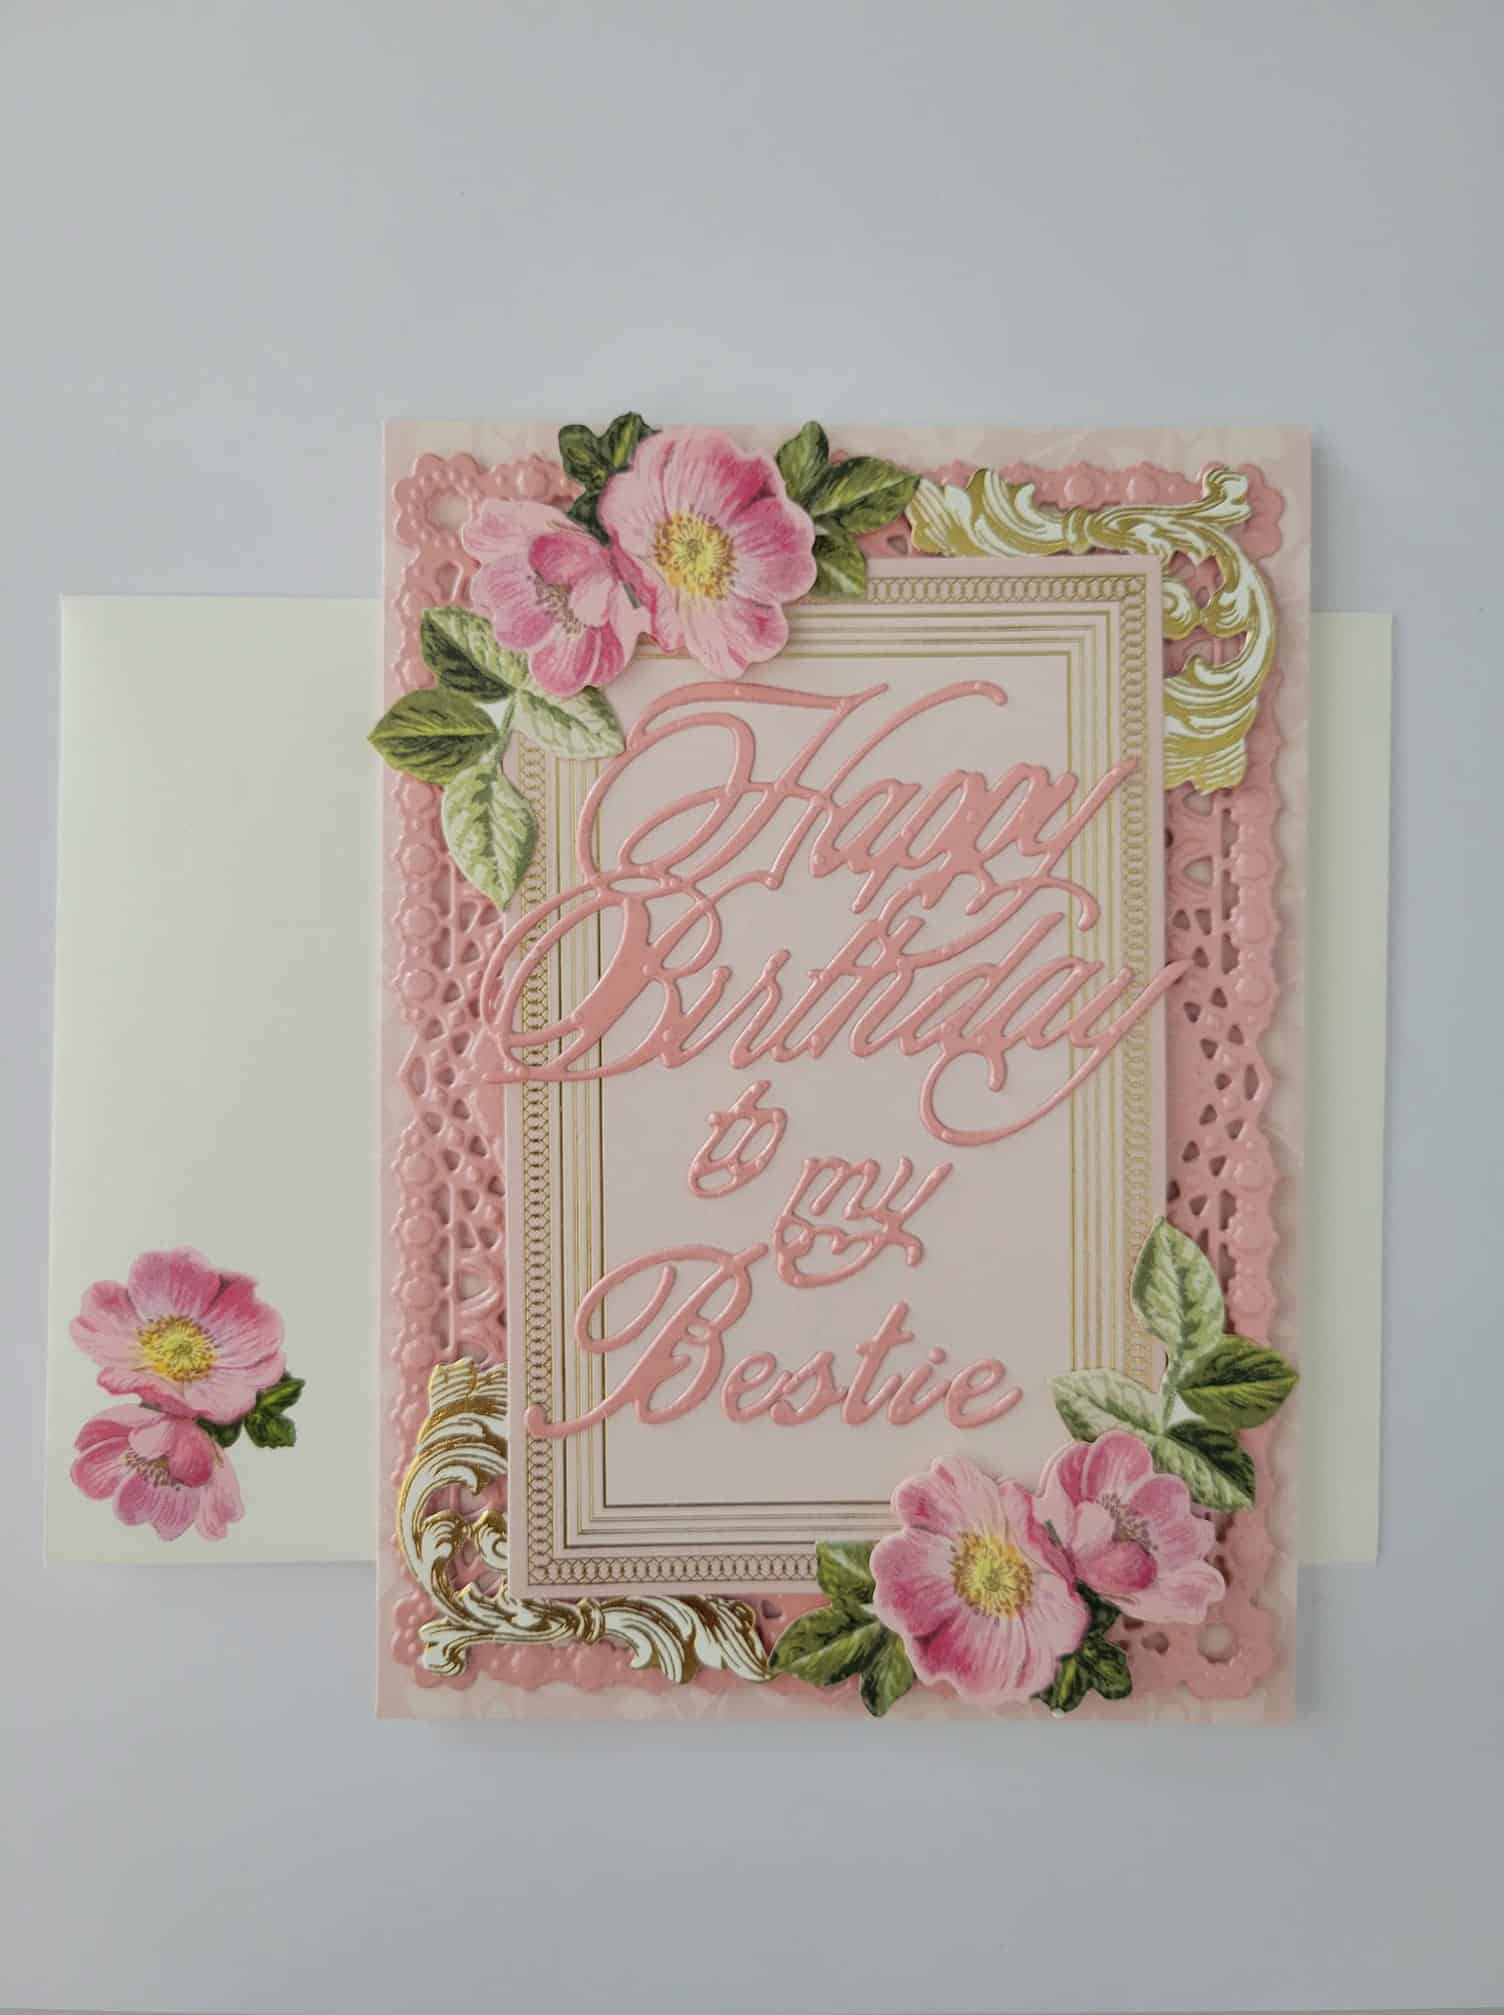 A birthday card with pink flowers on it.